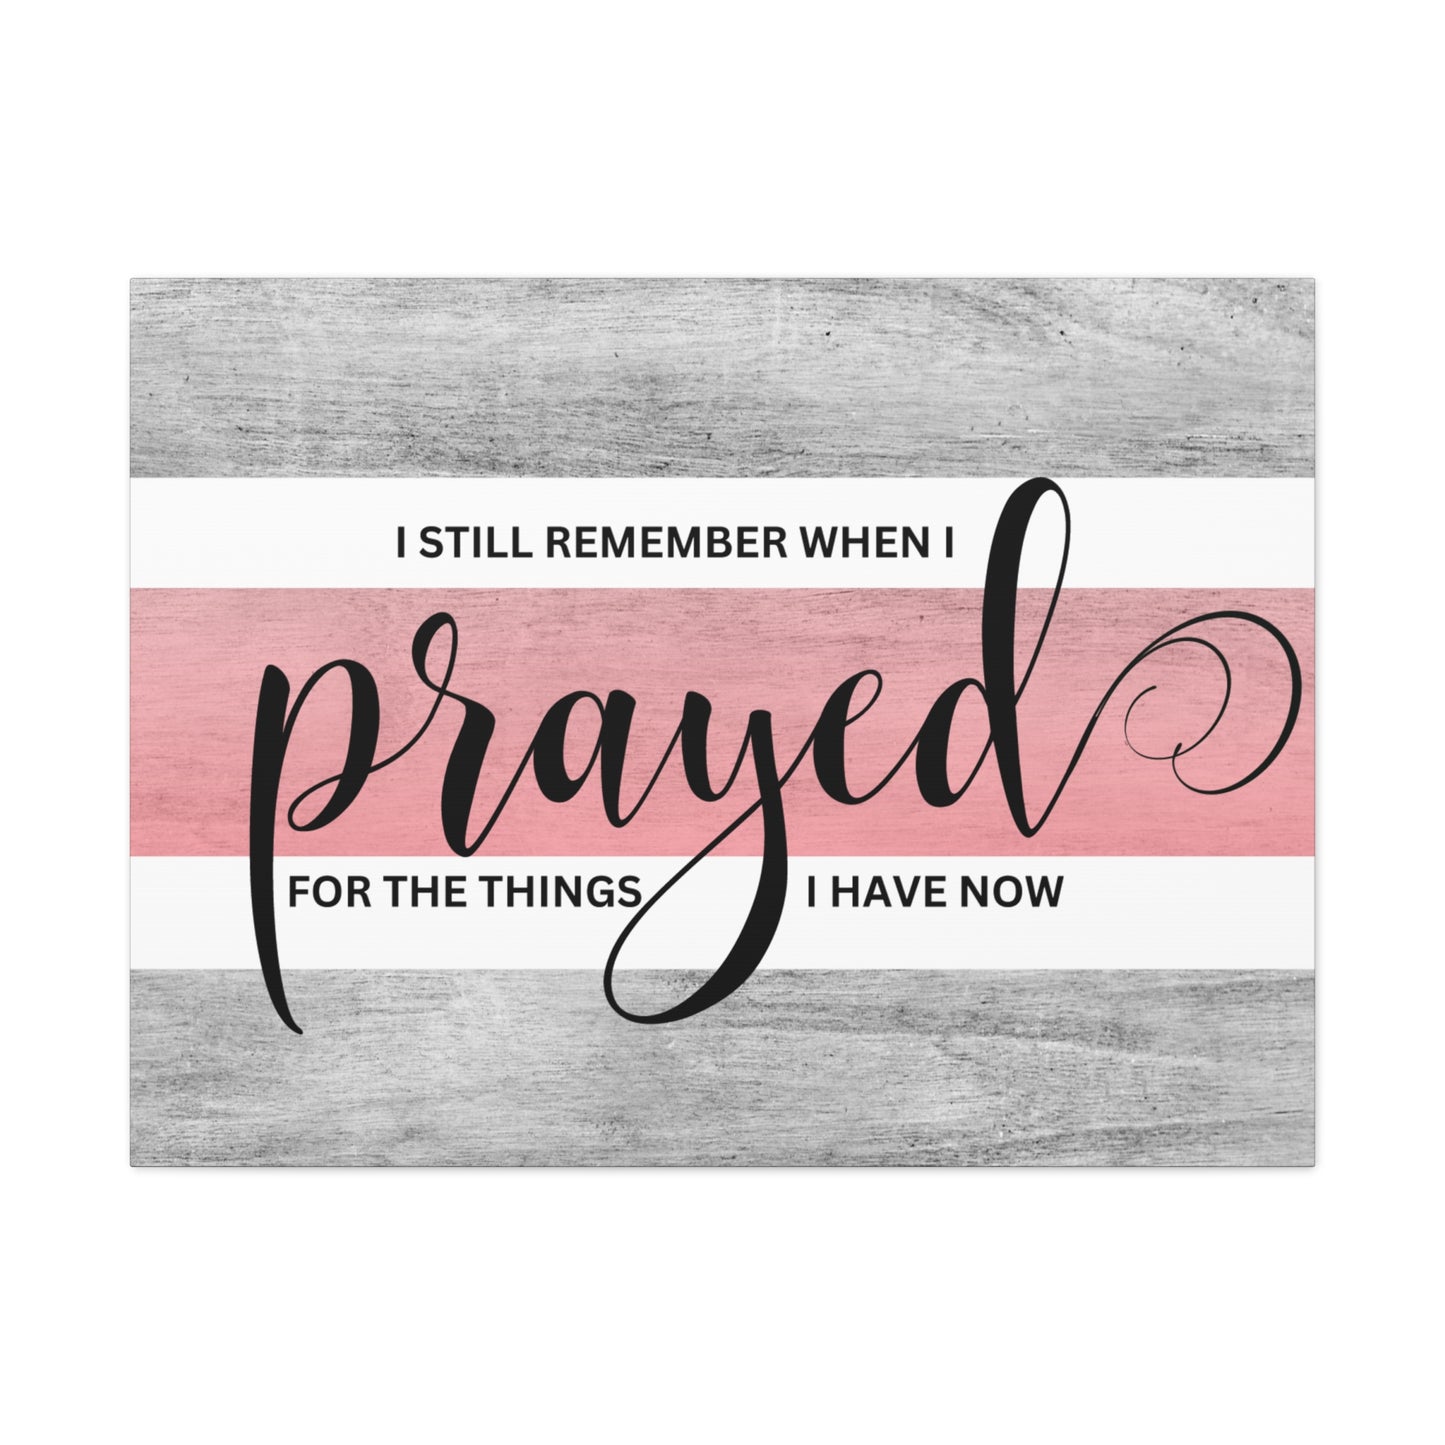 Christian Wall Art: Prayed For (Wood Frame Ready to Hang)